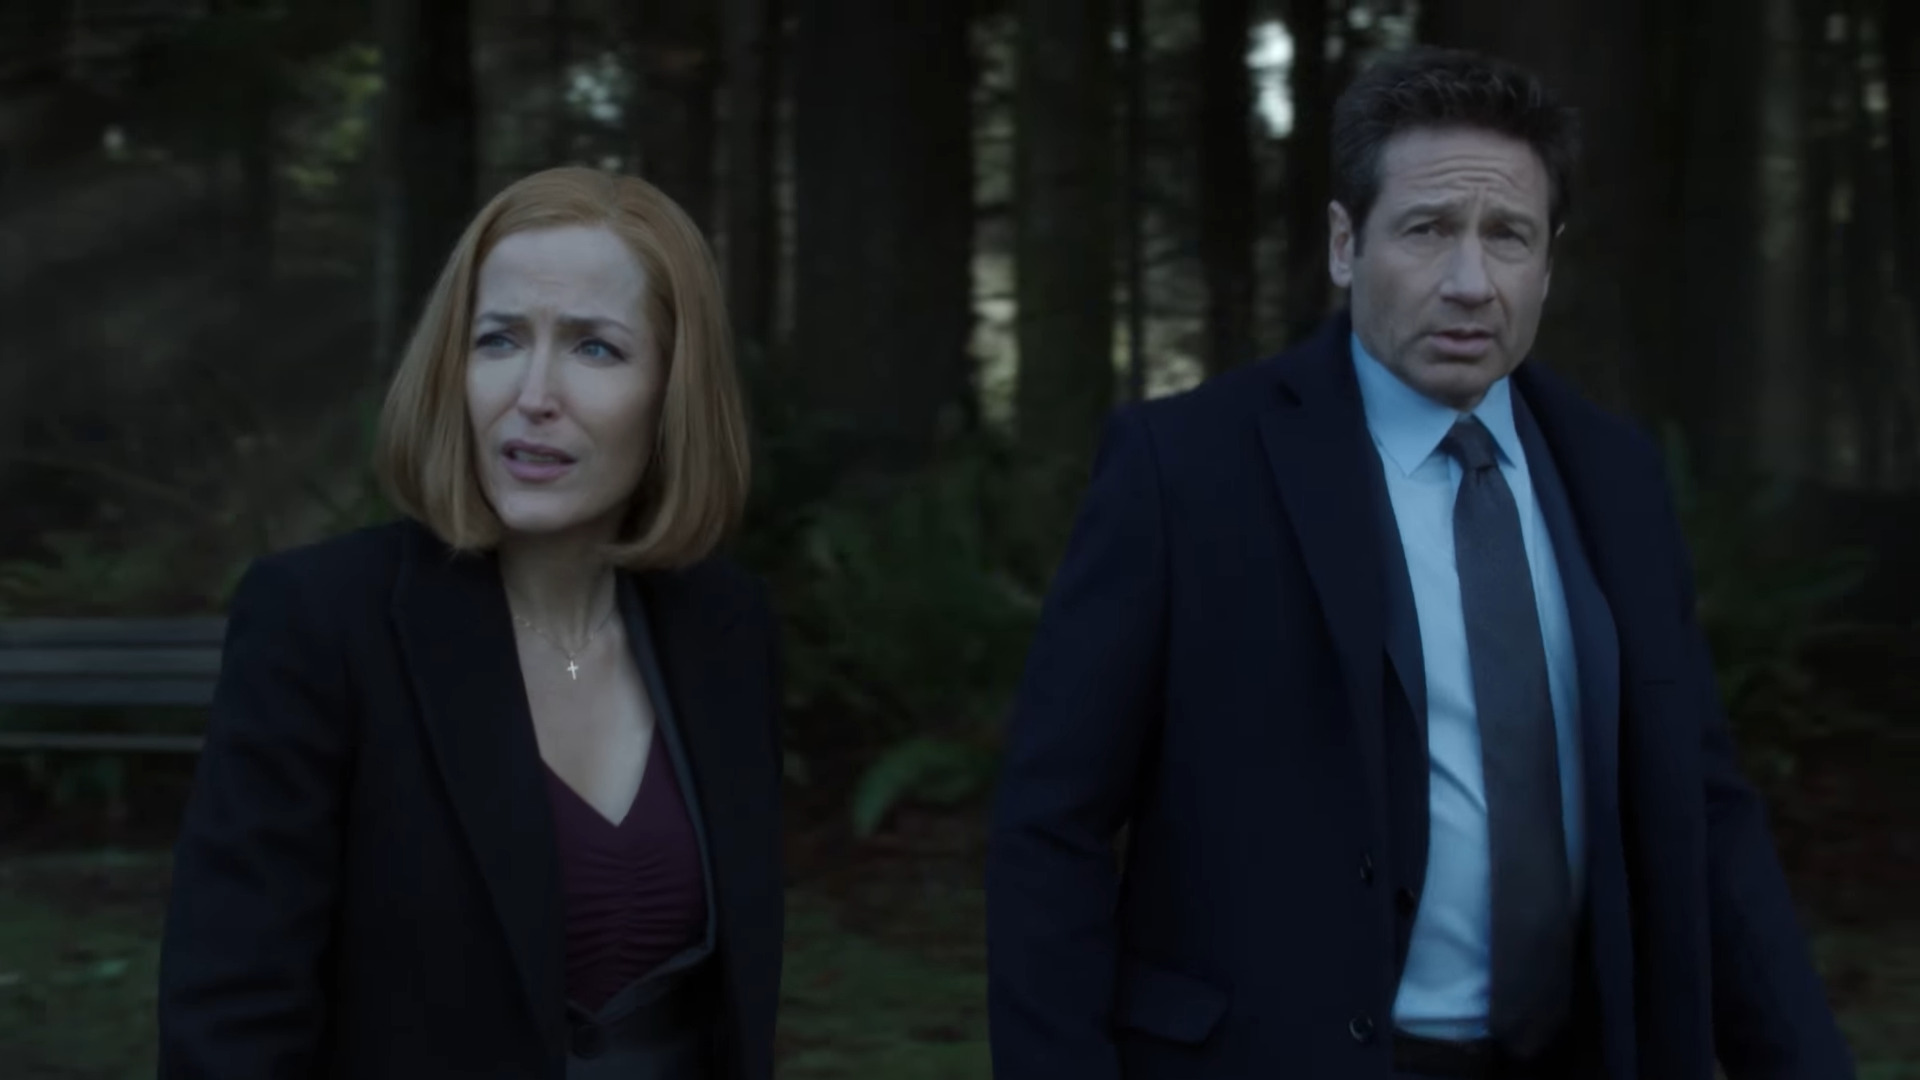 Agent Scully (Gillian Anderson) and Agent Mulder (David Duchovny) make their way to Connecticut in The X-Files Season 11 Episode 8 "Familiar" (2018), 20th Century Studios